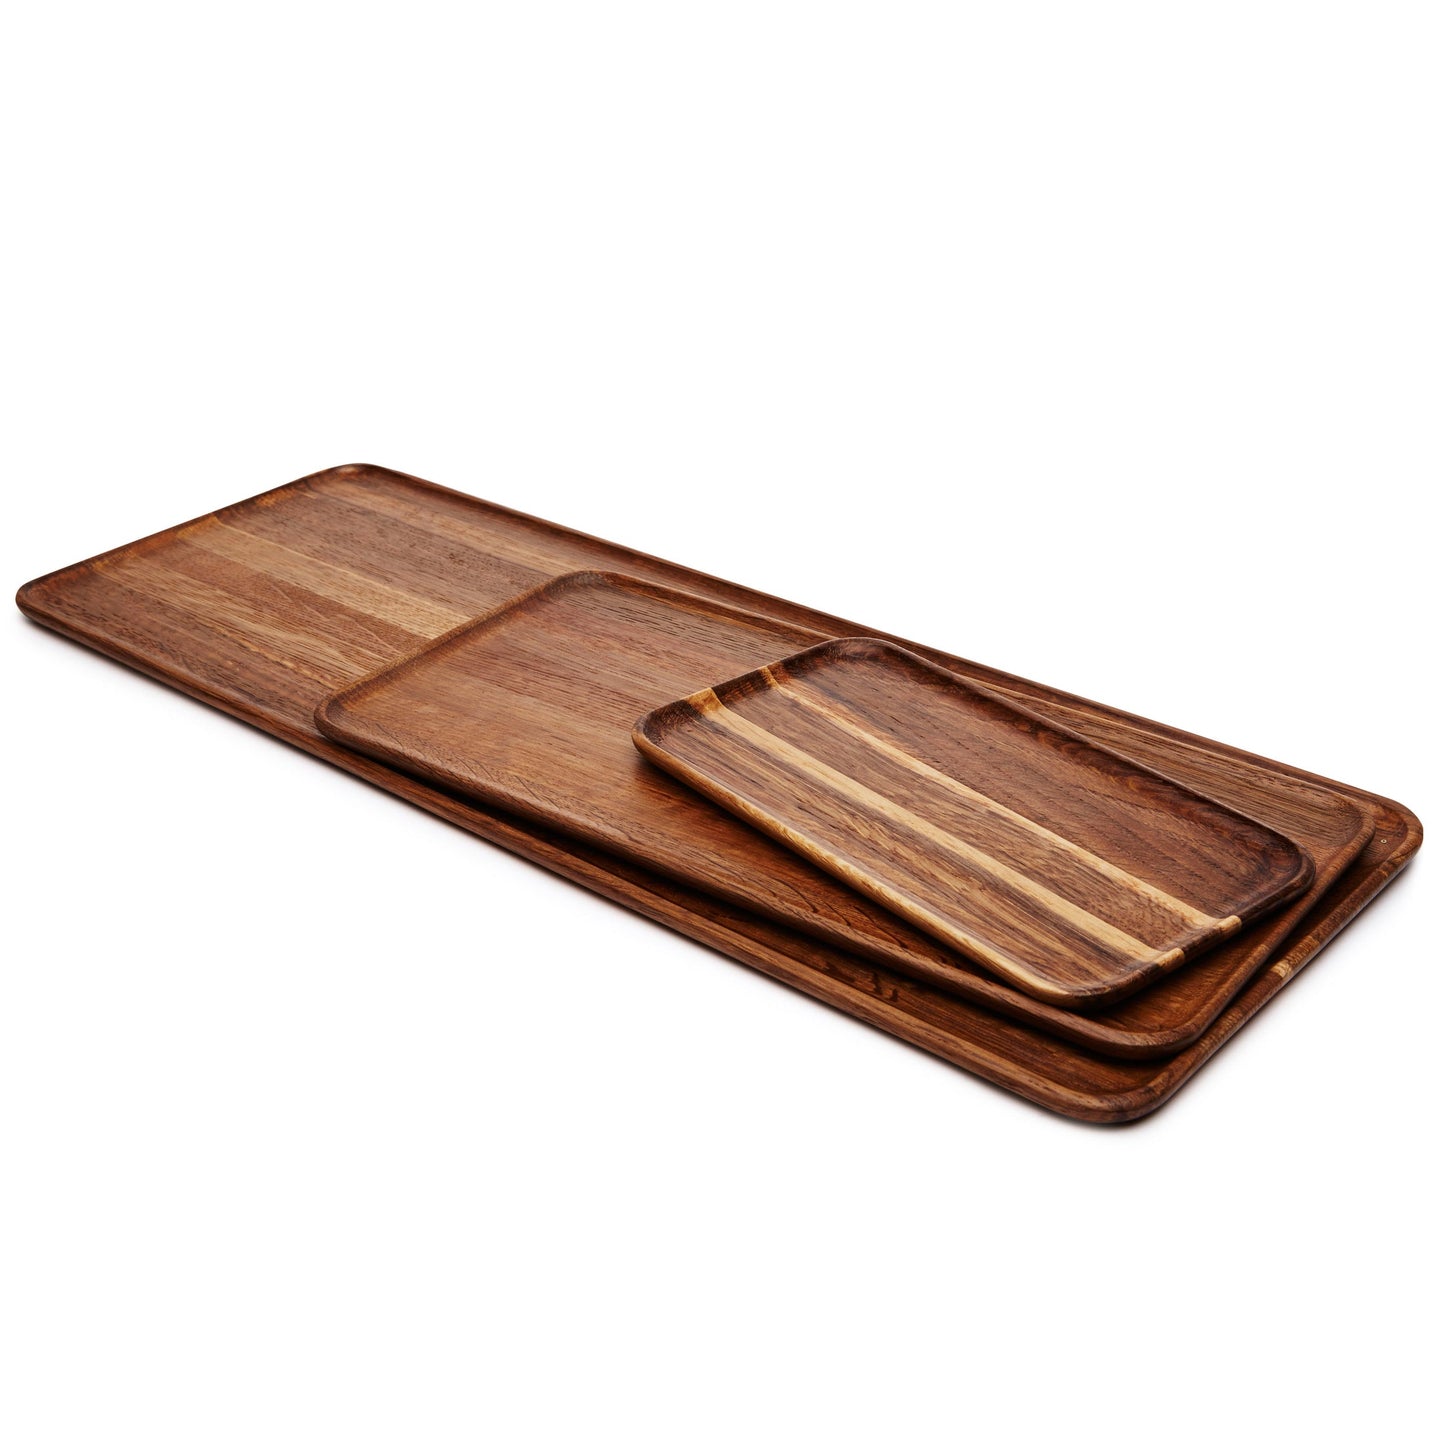 Sands Made Wooden Tray No 1